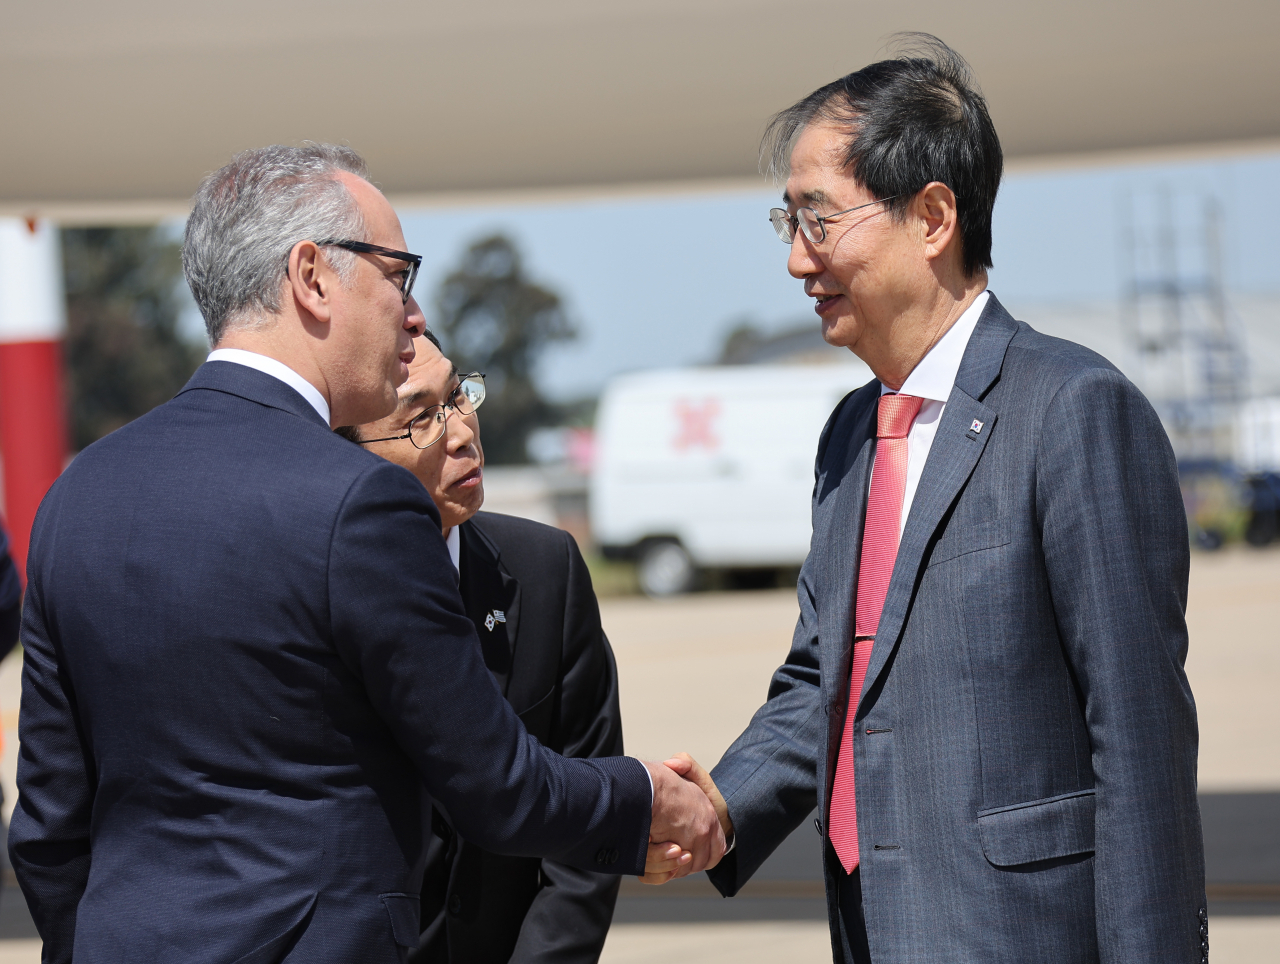 Prime Minister Han Duck-soo (R) is greeted by a Uruguayan official after arriving in Montevideo for an official visit on Wednesday. (Yonhap)